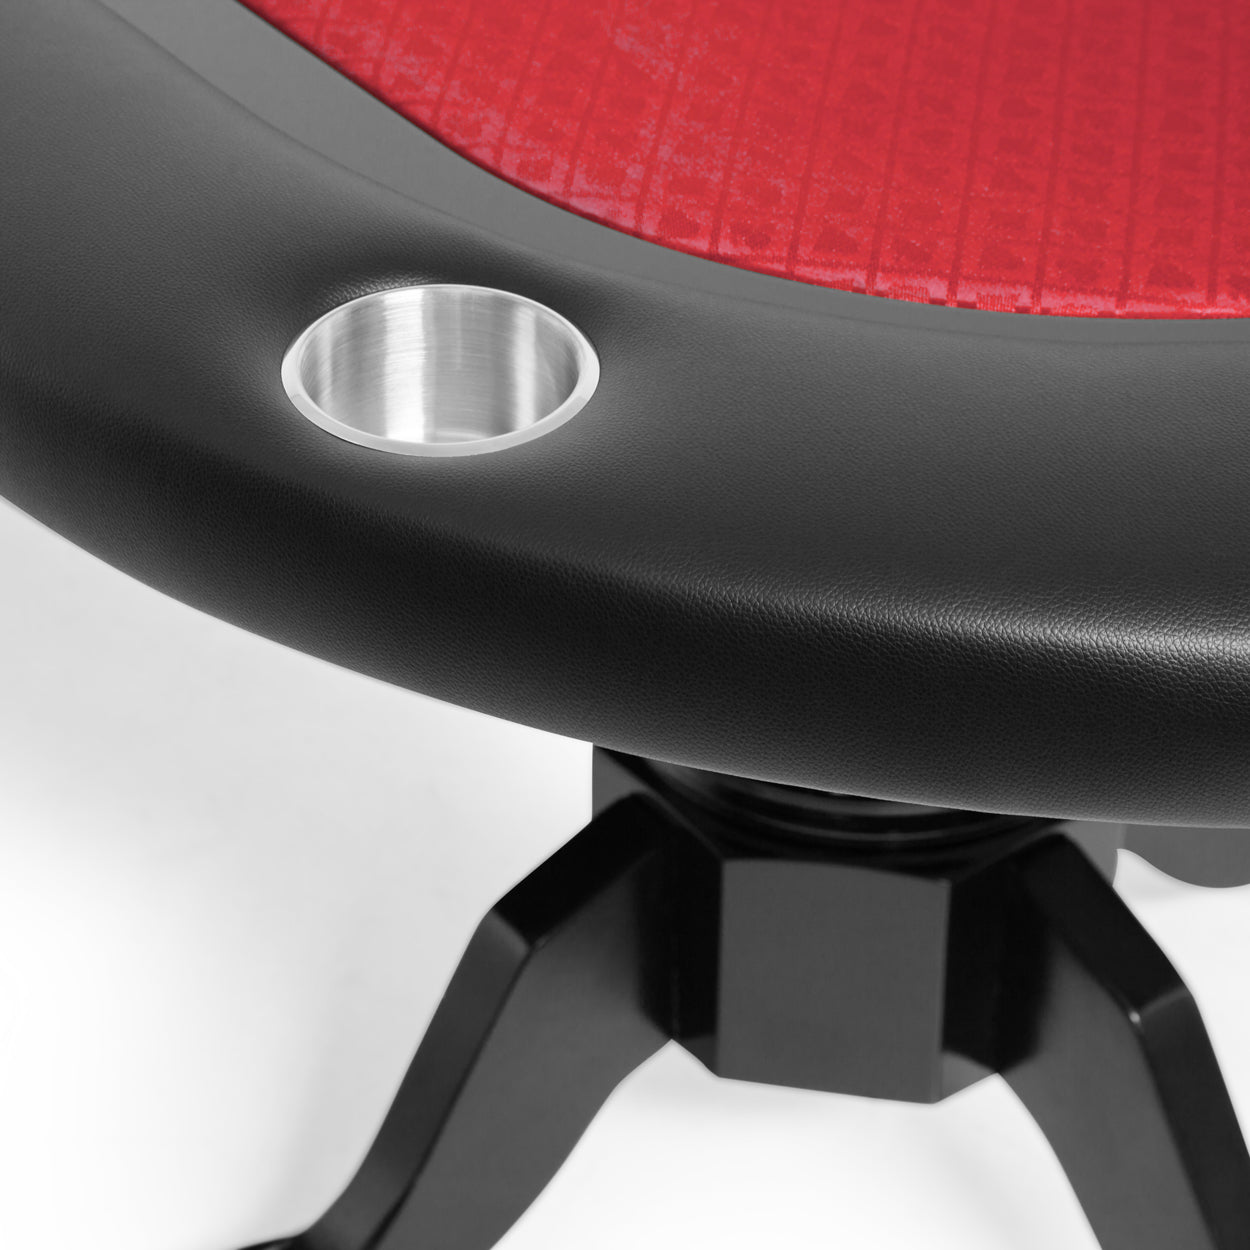 BBO The Elite Premium Poker Table red speedcloth close up of cupholder